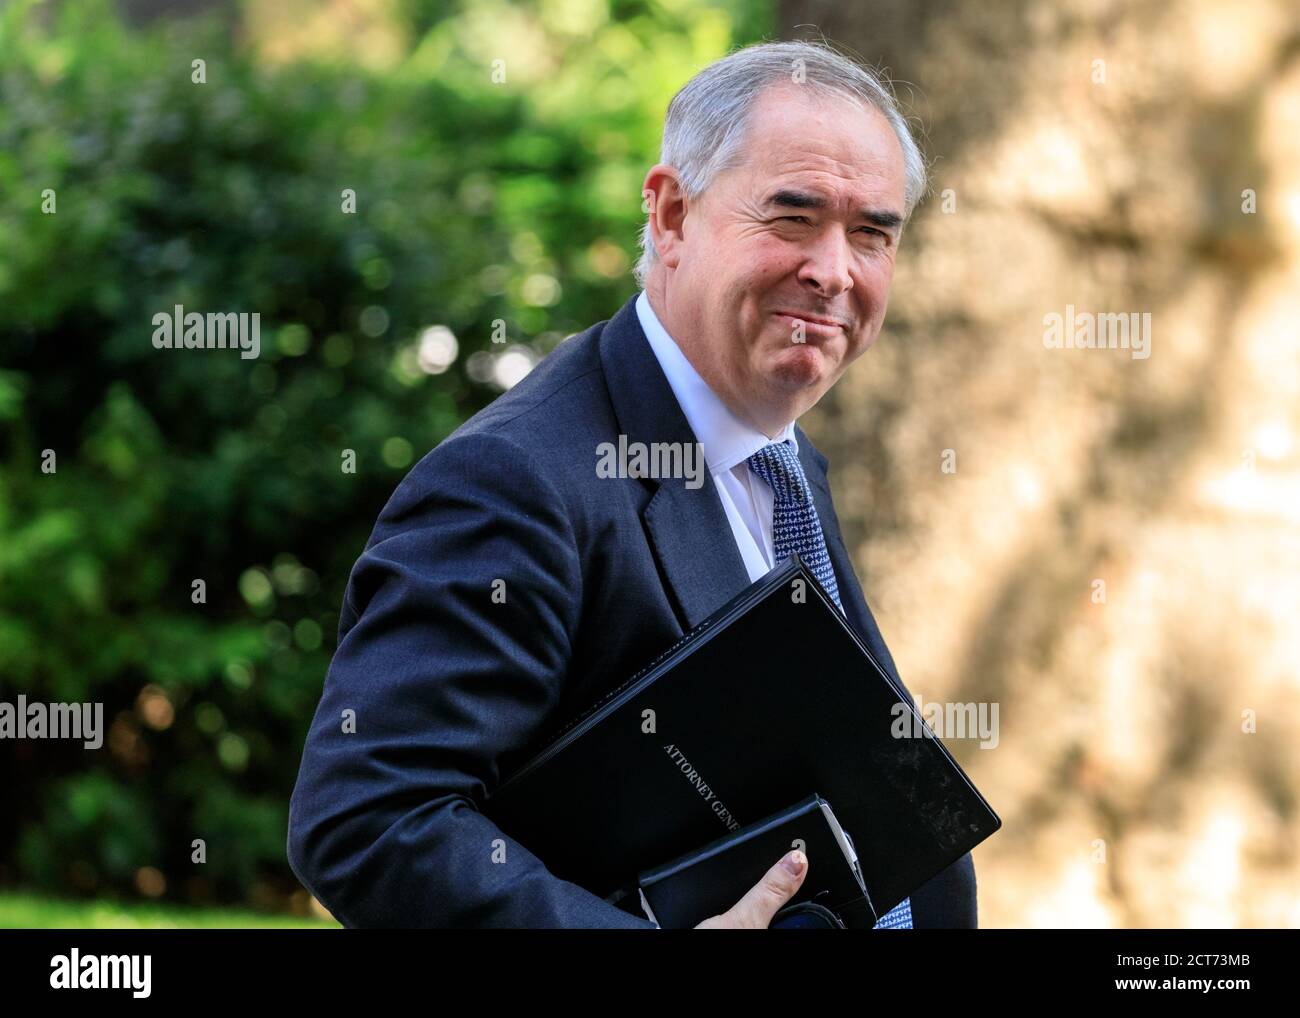 Geoffrey Cox QC MP, Attorney General, British Conservative Party politician, London, UK Stock Photo